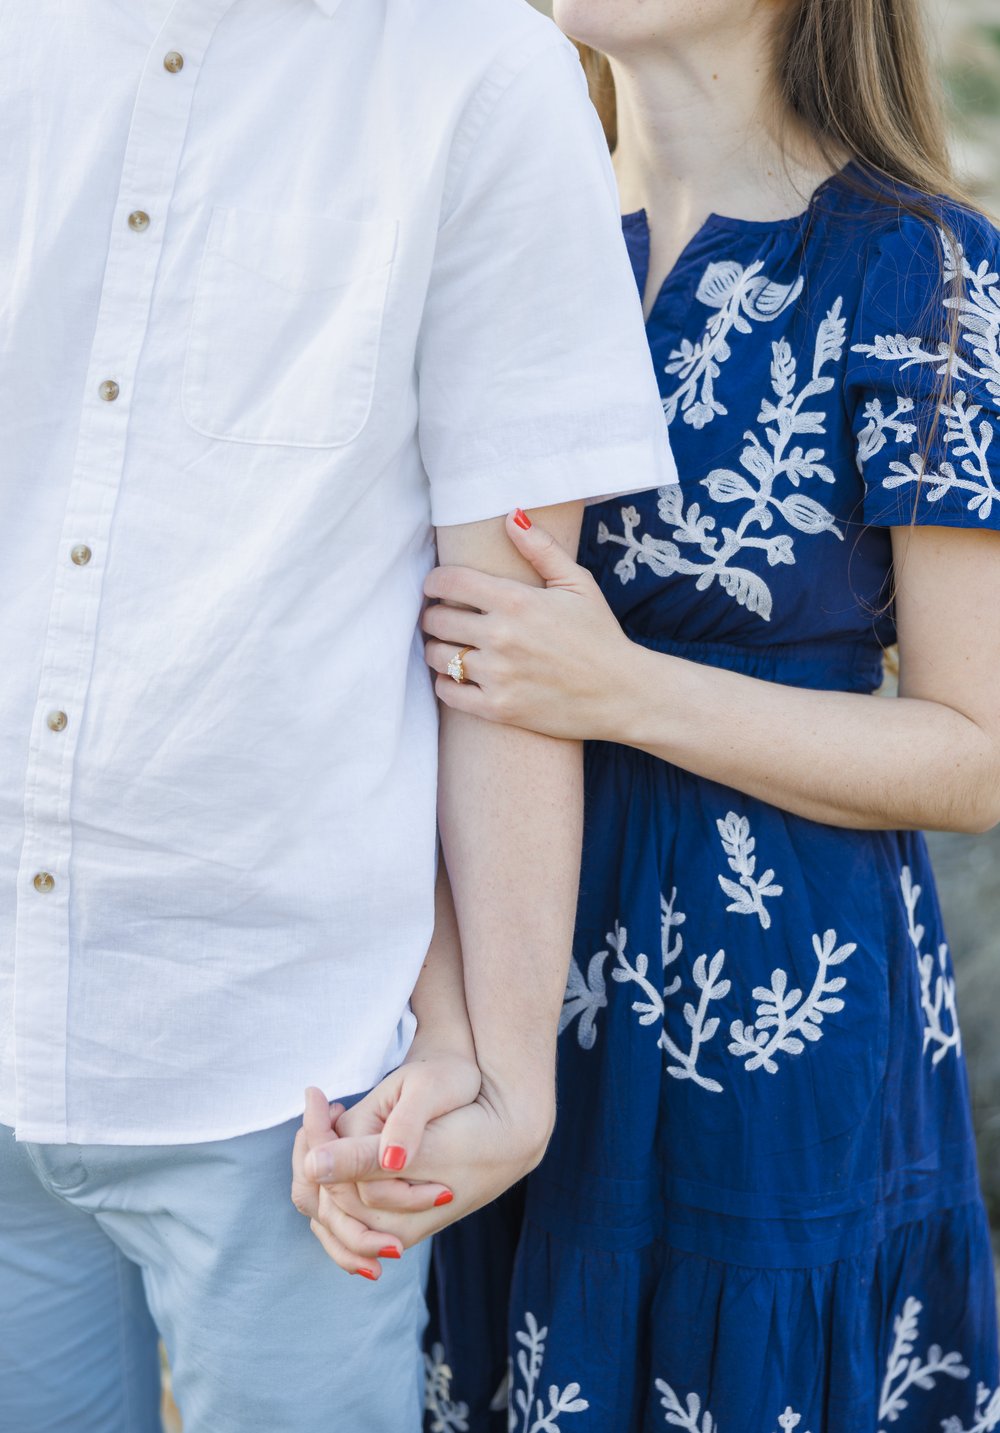  A detailed portrait of an engaged couple holding hands and standing close by Savanna Richardson Photography. blue dress engagements holding hands pink nails #SavannaRichardsonPhotography #SavannaRichardsonEngagements #UtahEngagements #AntelopeIsland